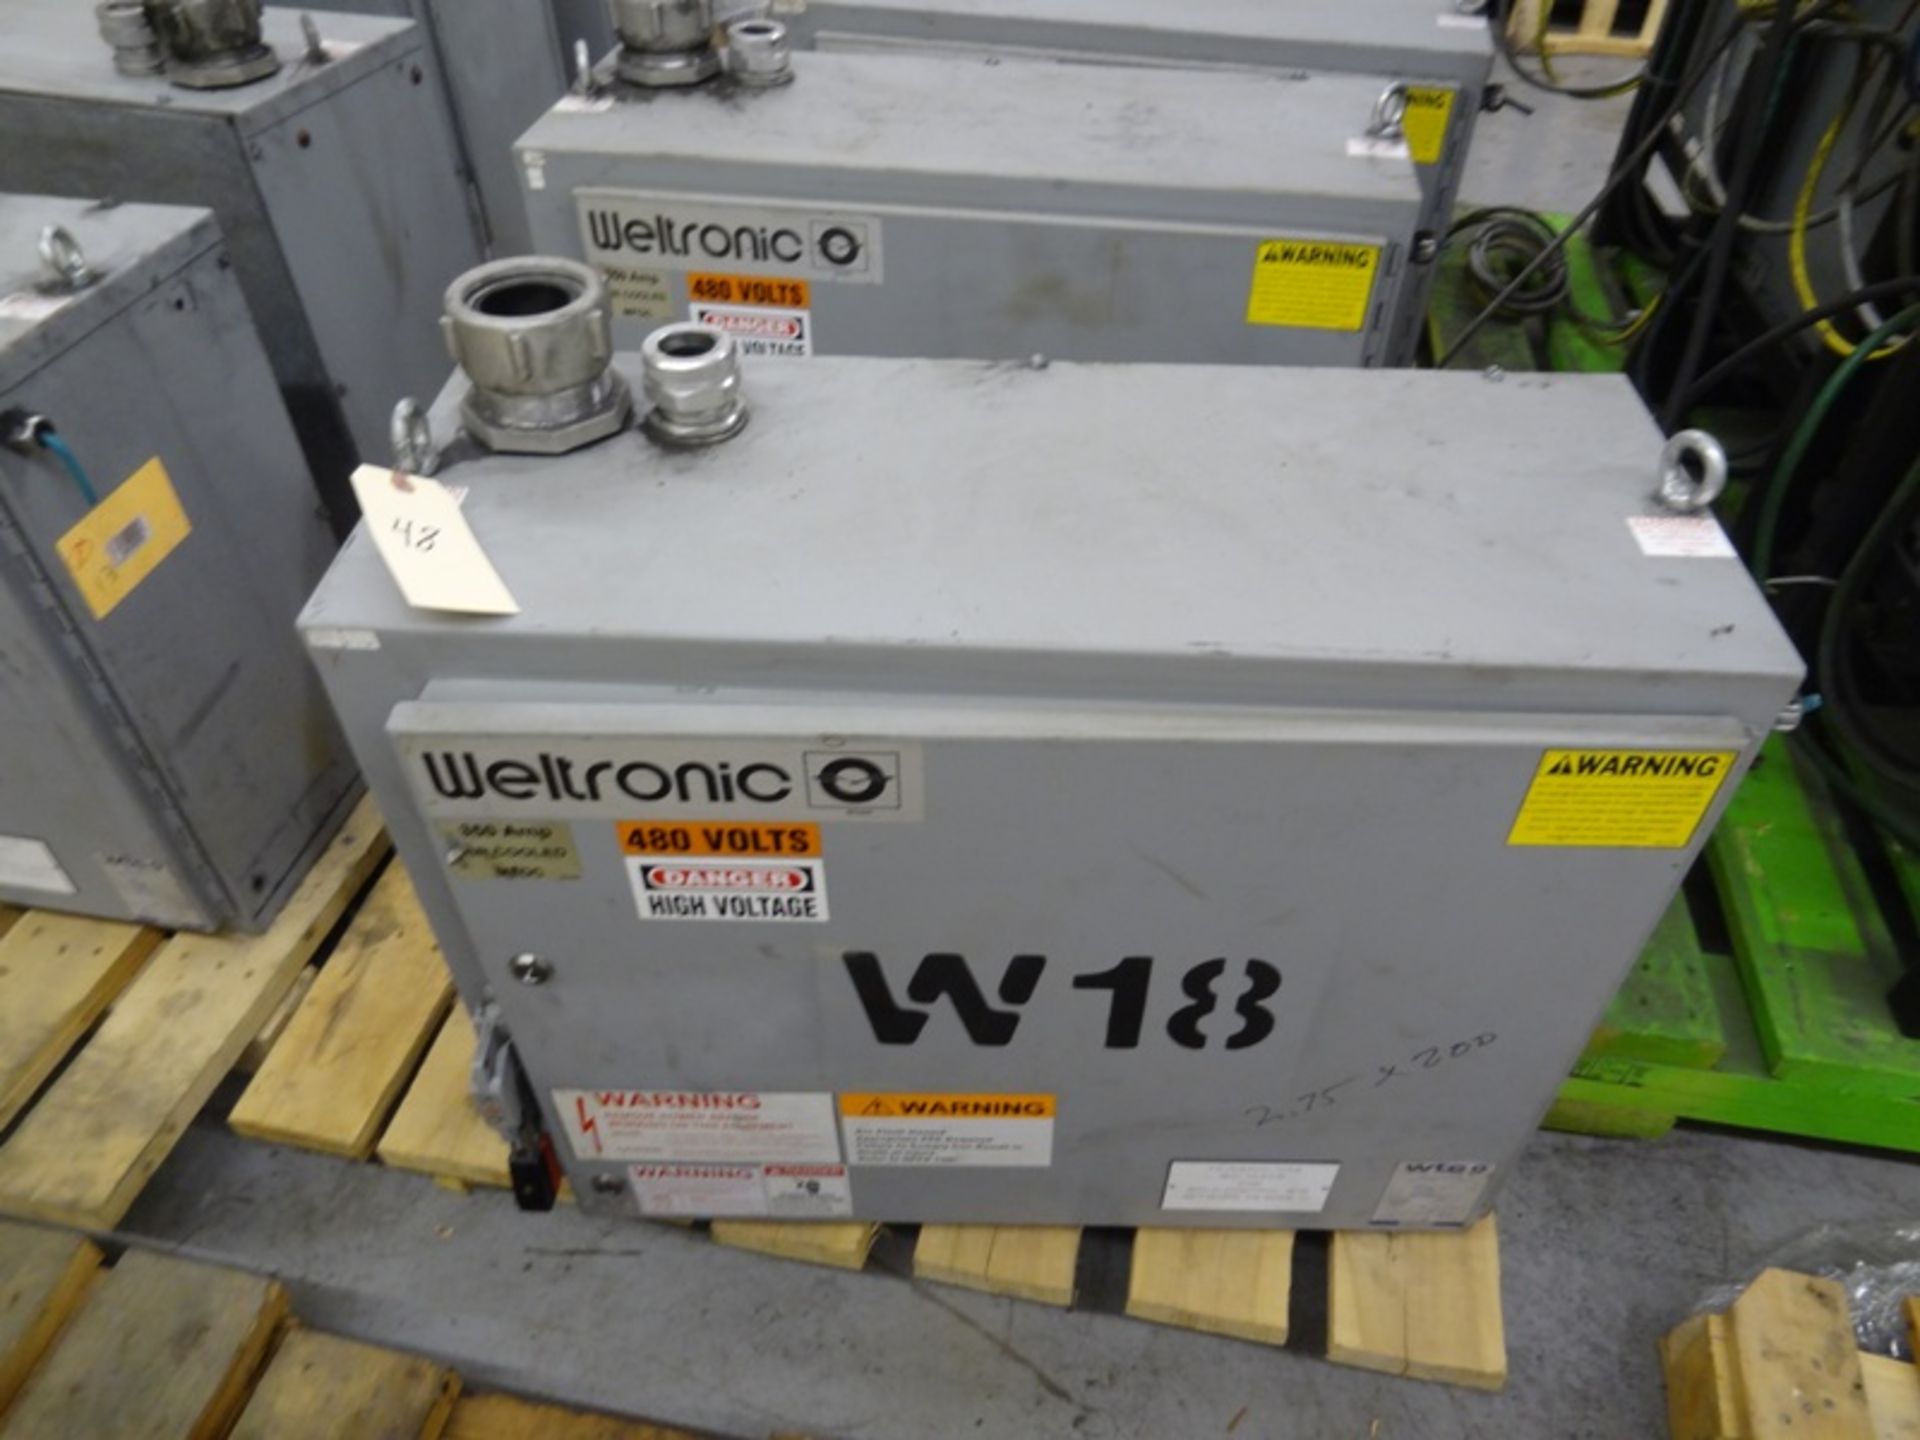 Weltronic 350 Amp Air Cooled MFDC Spot Weld Controller/Timer